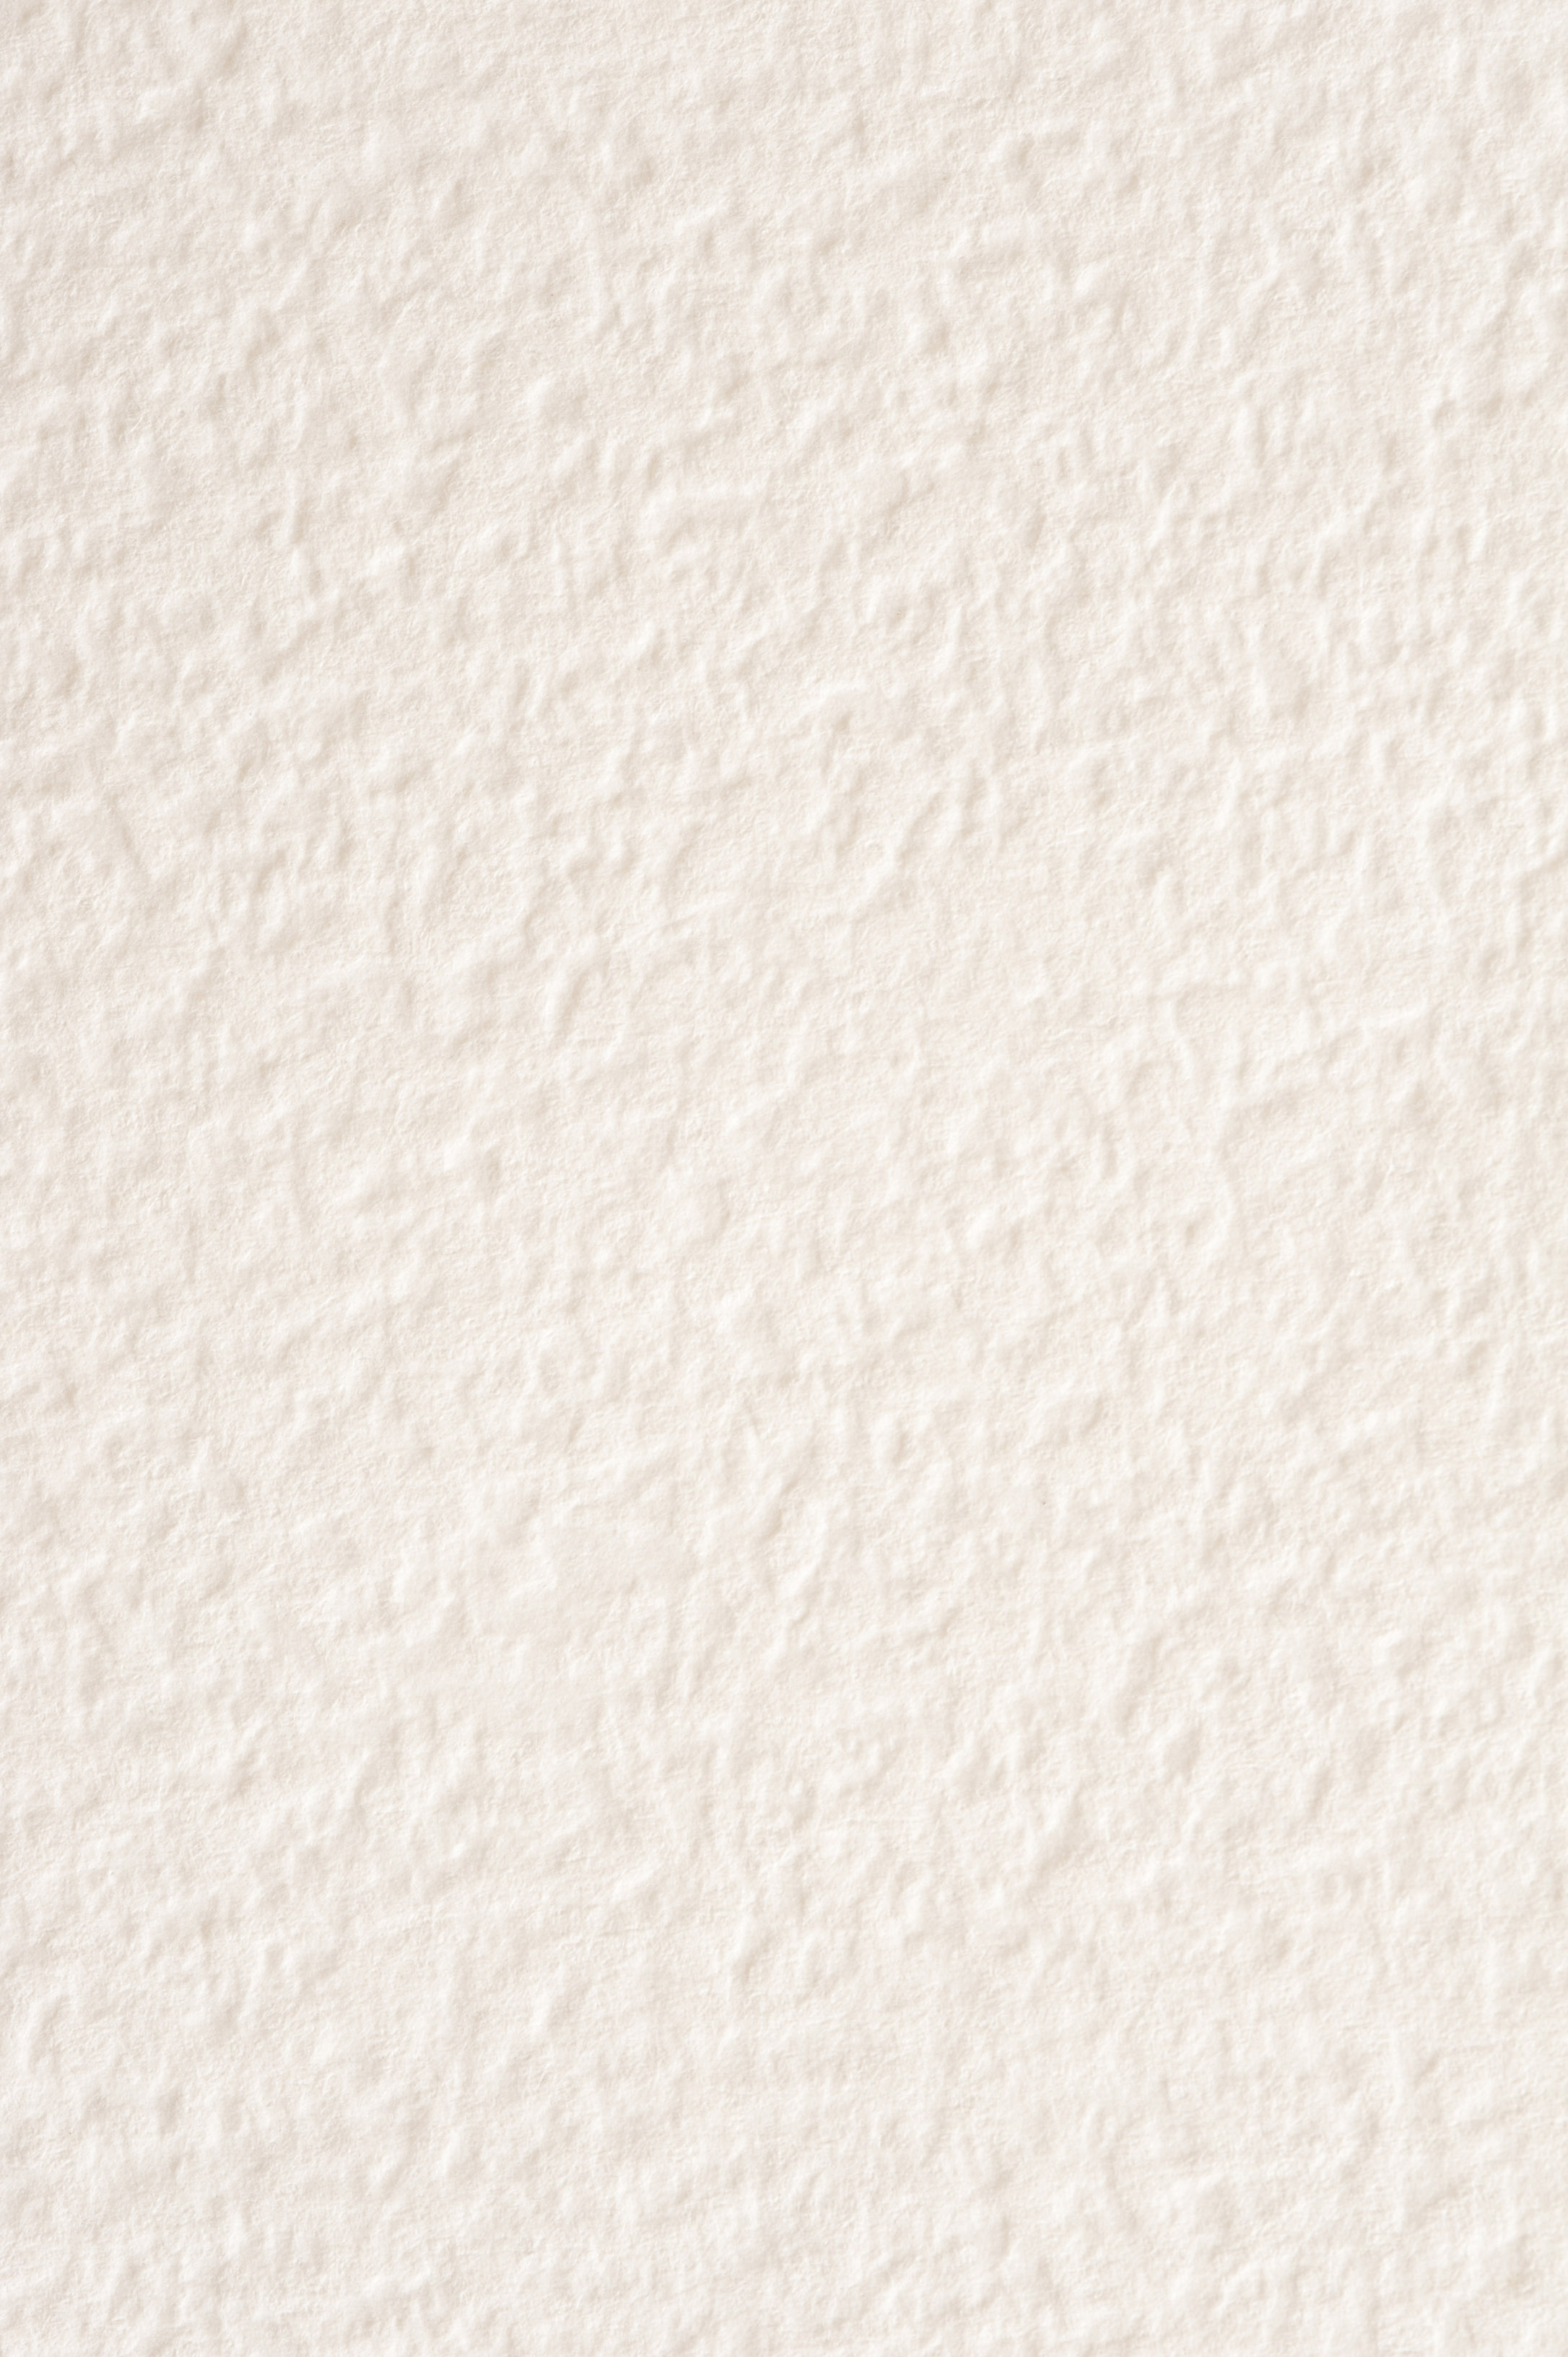 fine tant paper texture | Free backgrounds and textures | Cr103.com